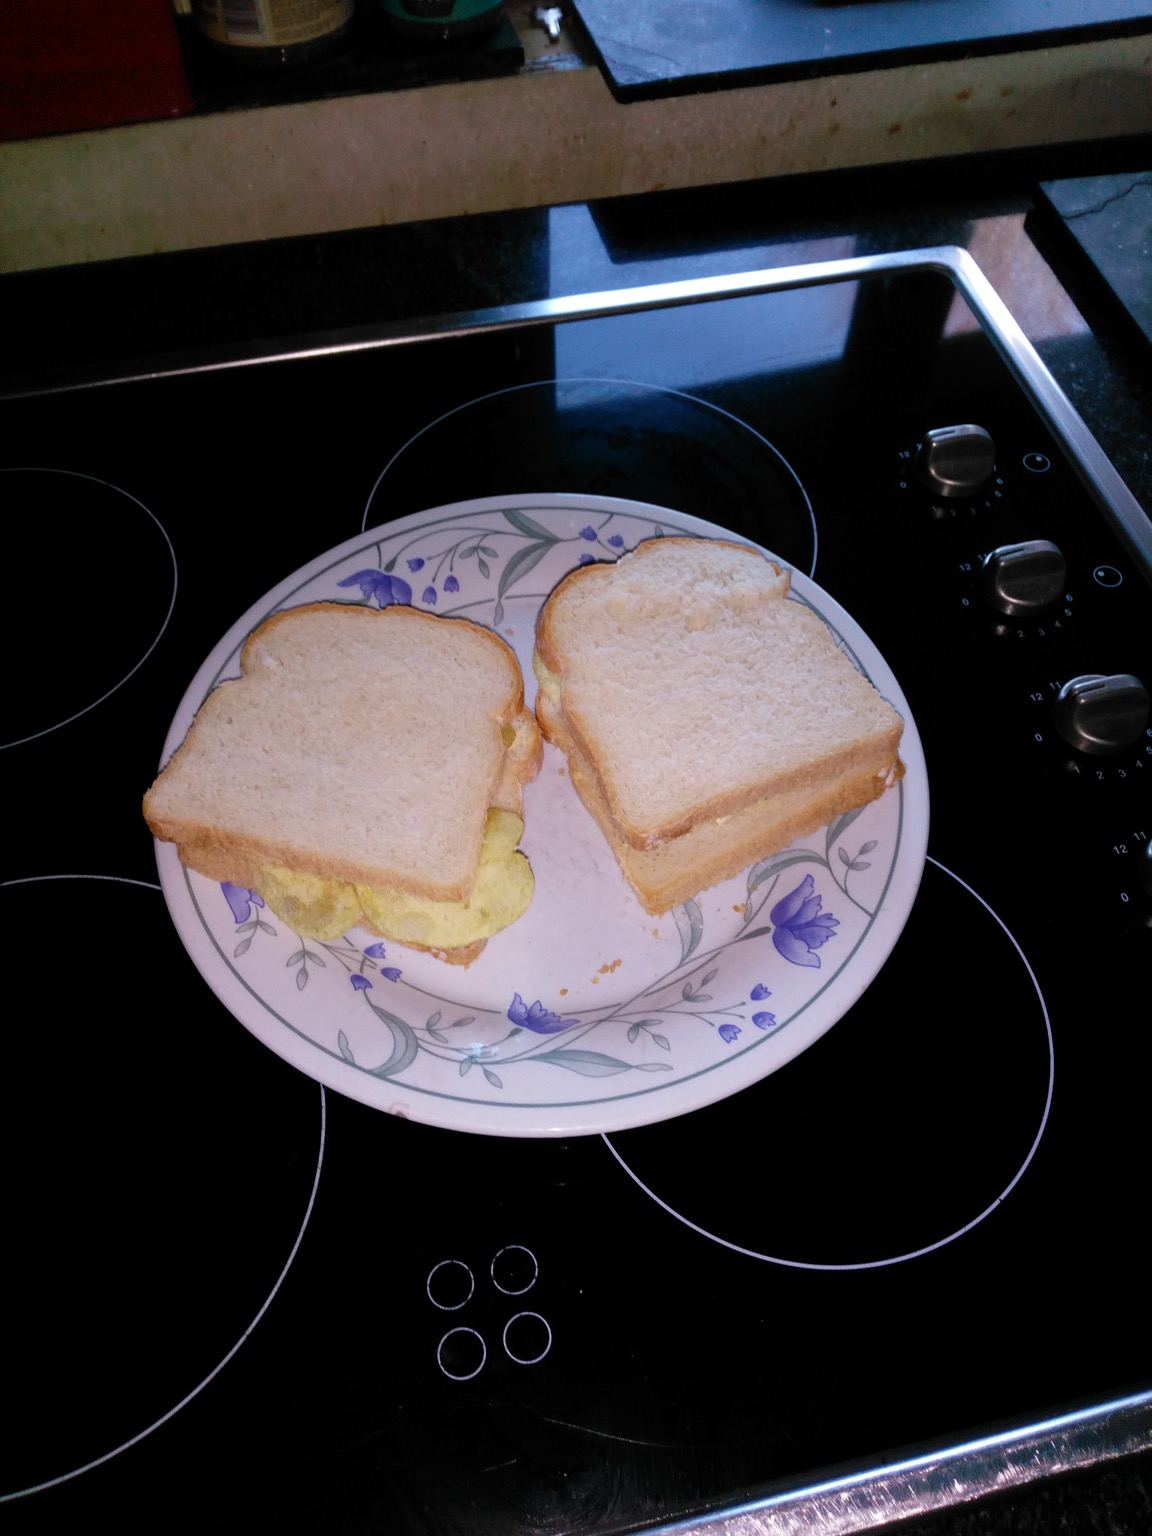 Two white crisp sandwiches placed on a cooker